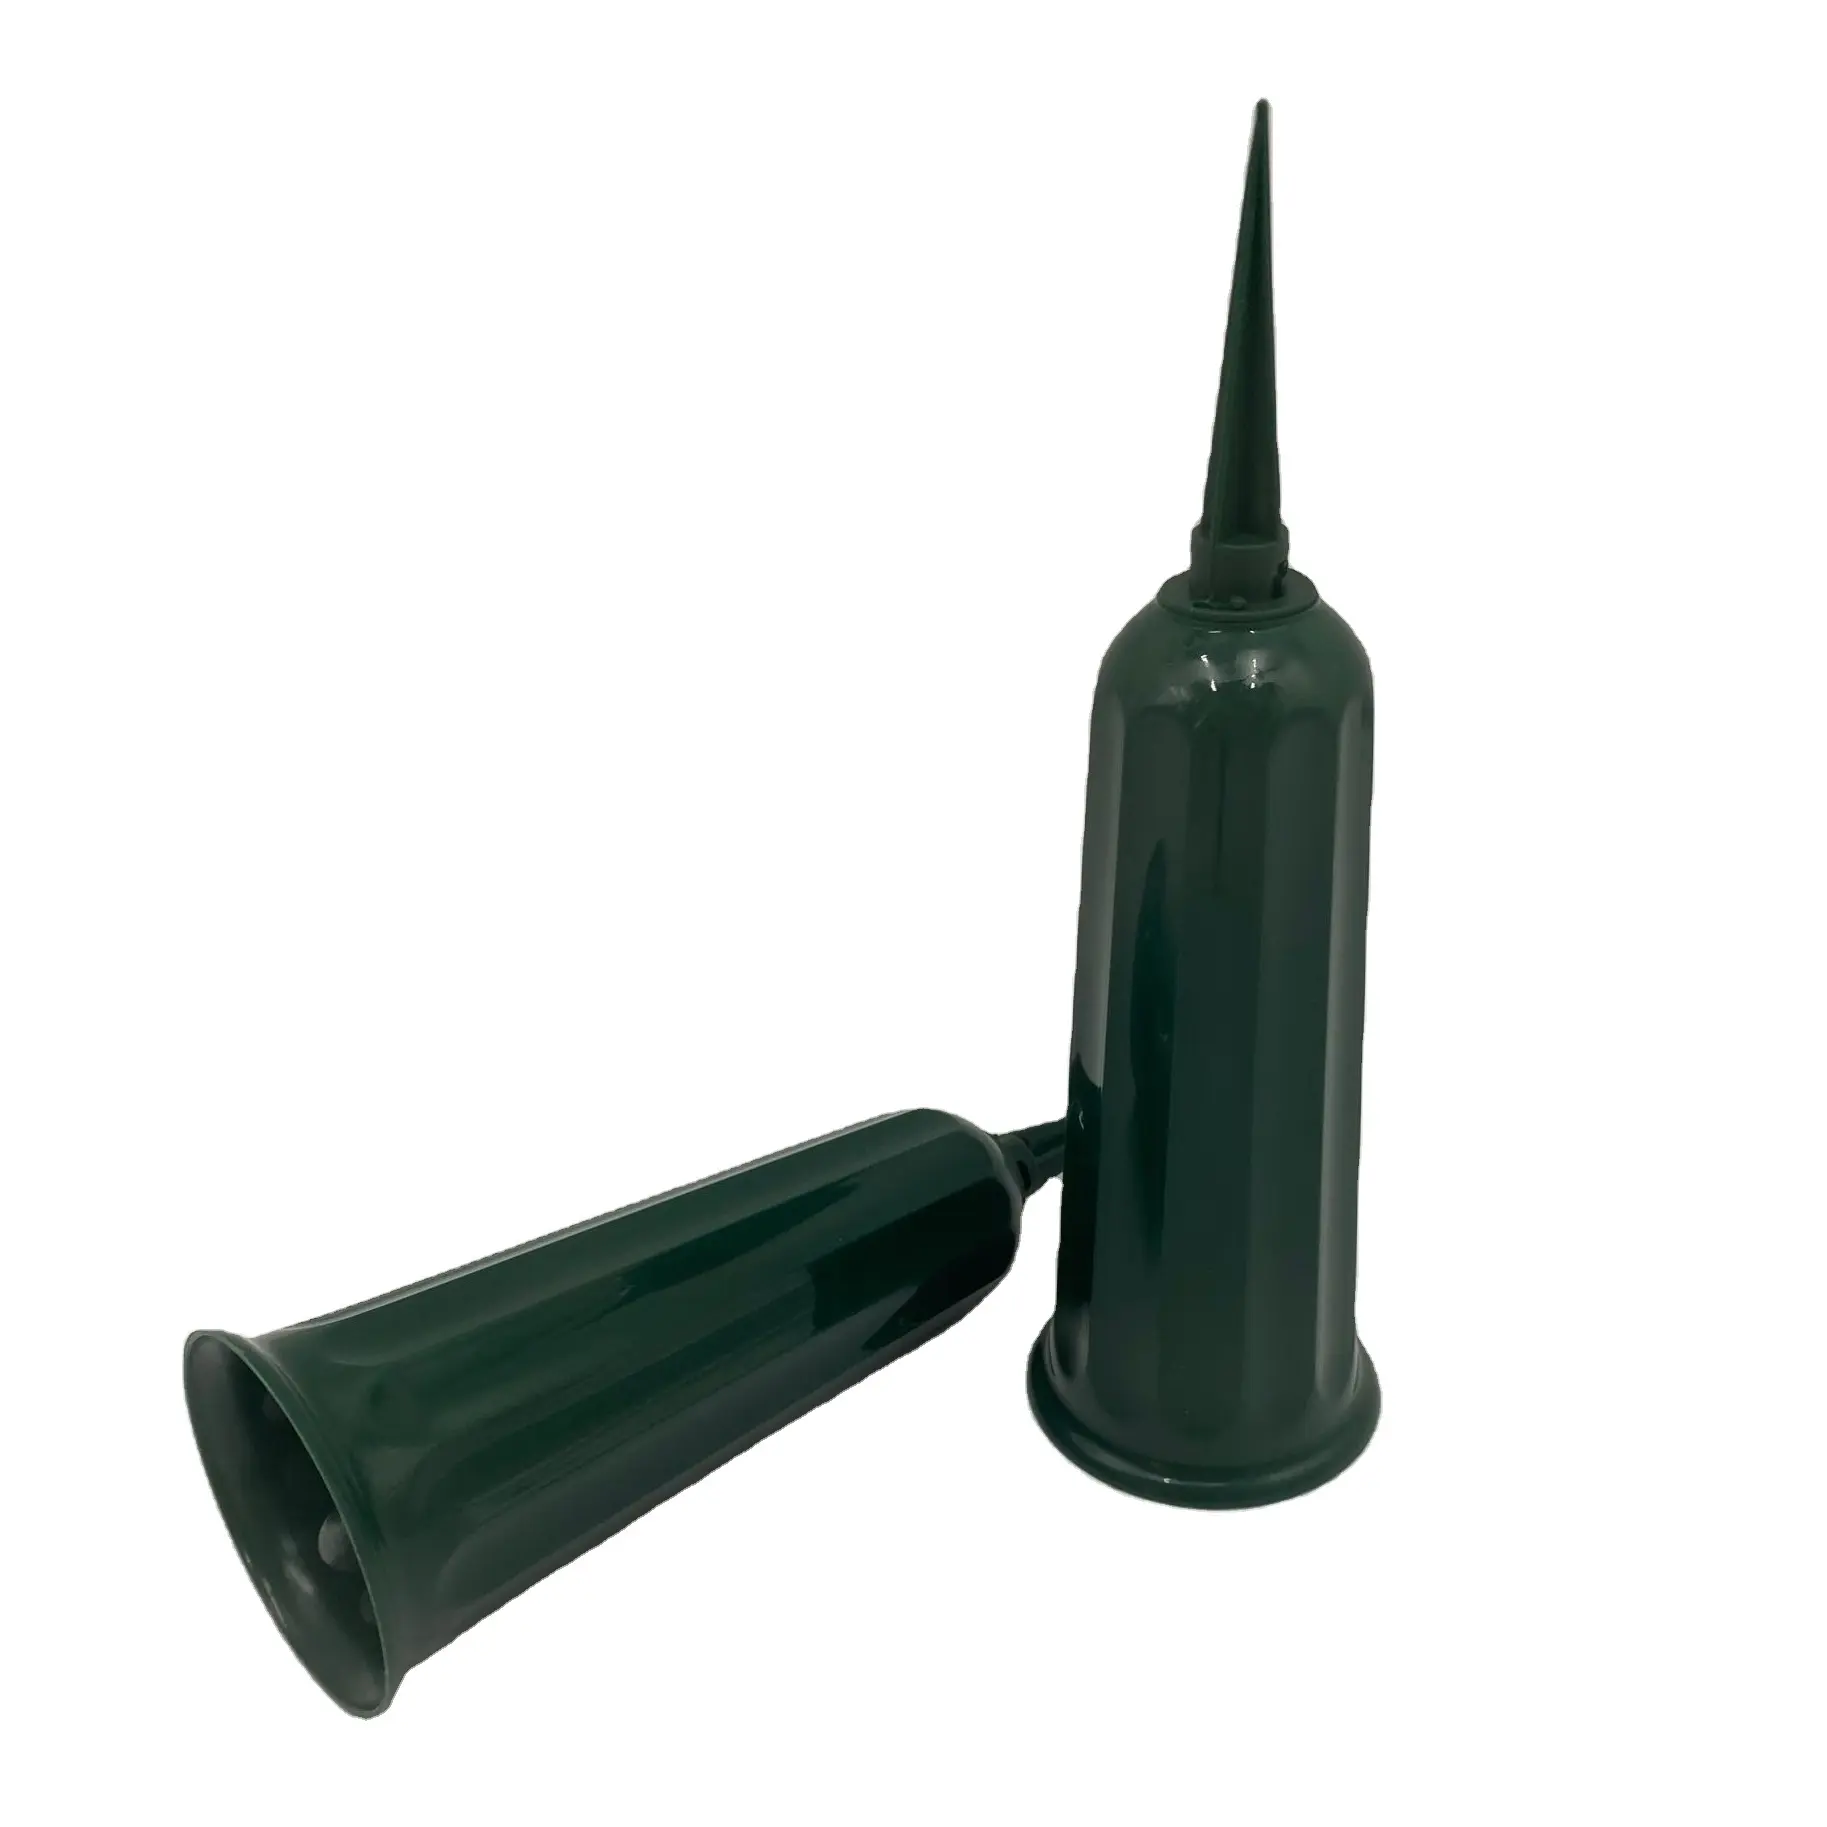 Cemetery cone vases plastic in ground cemetery vase graveside memorial vase with detachable for grave site set of 1